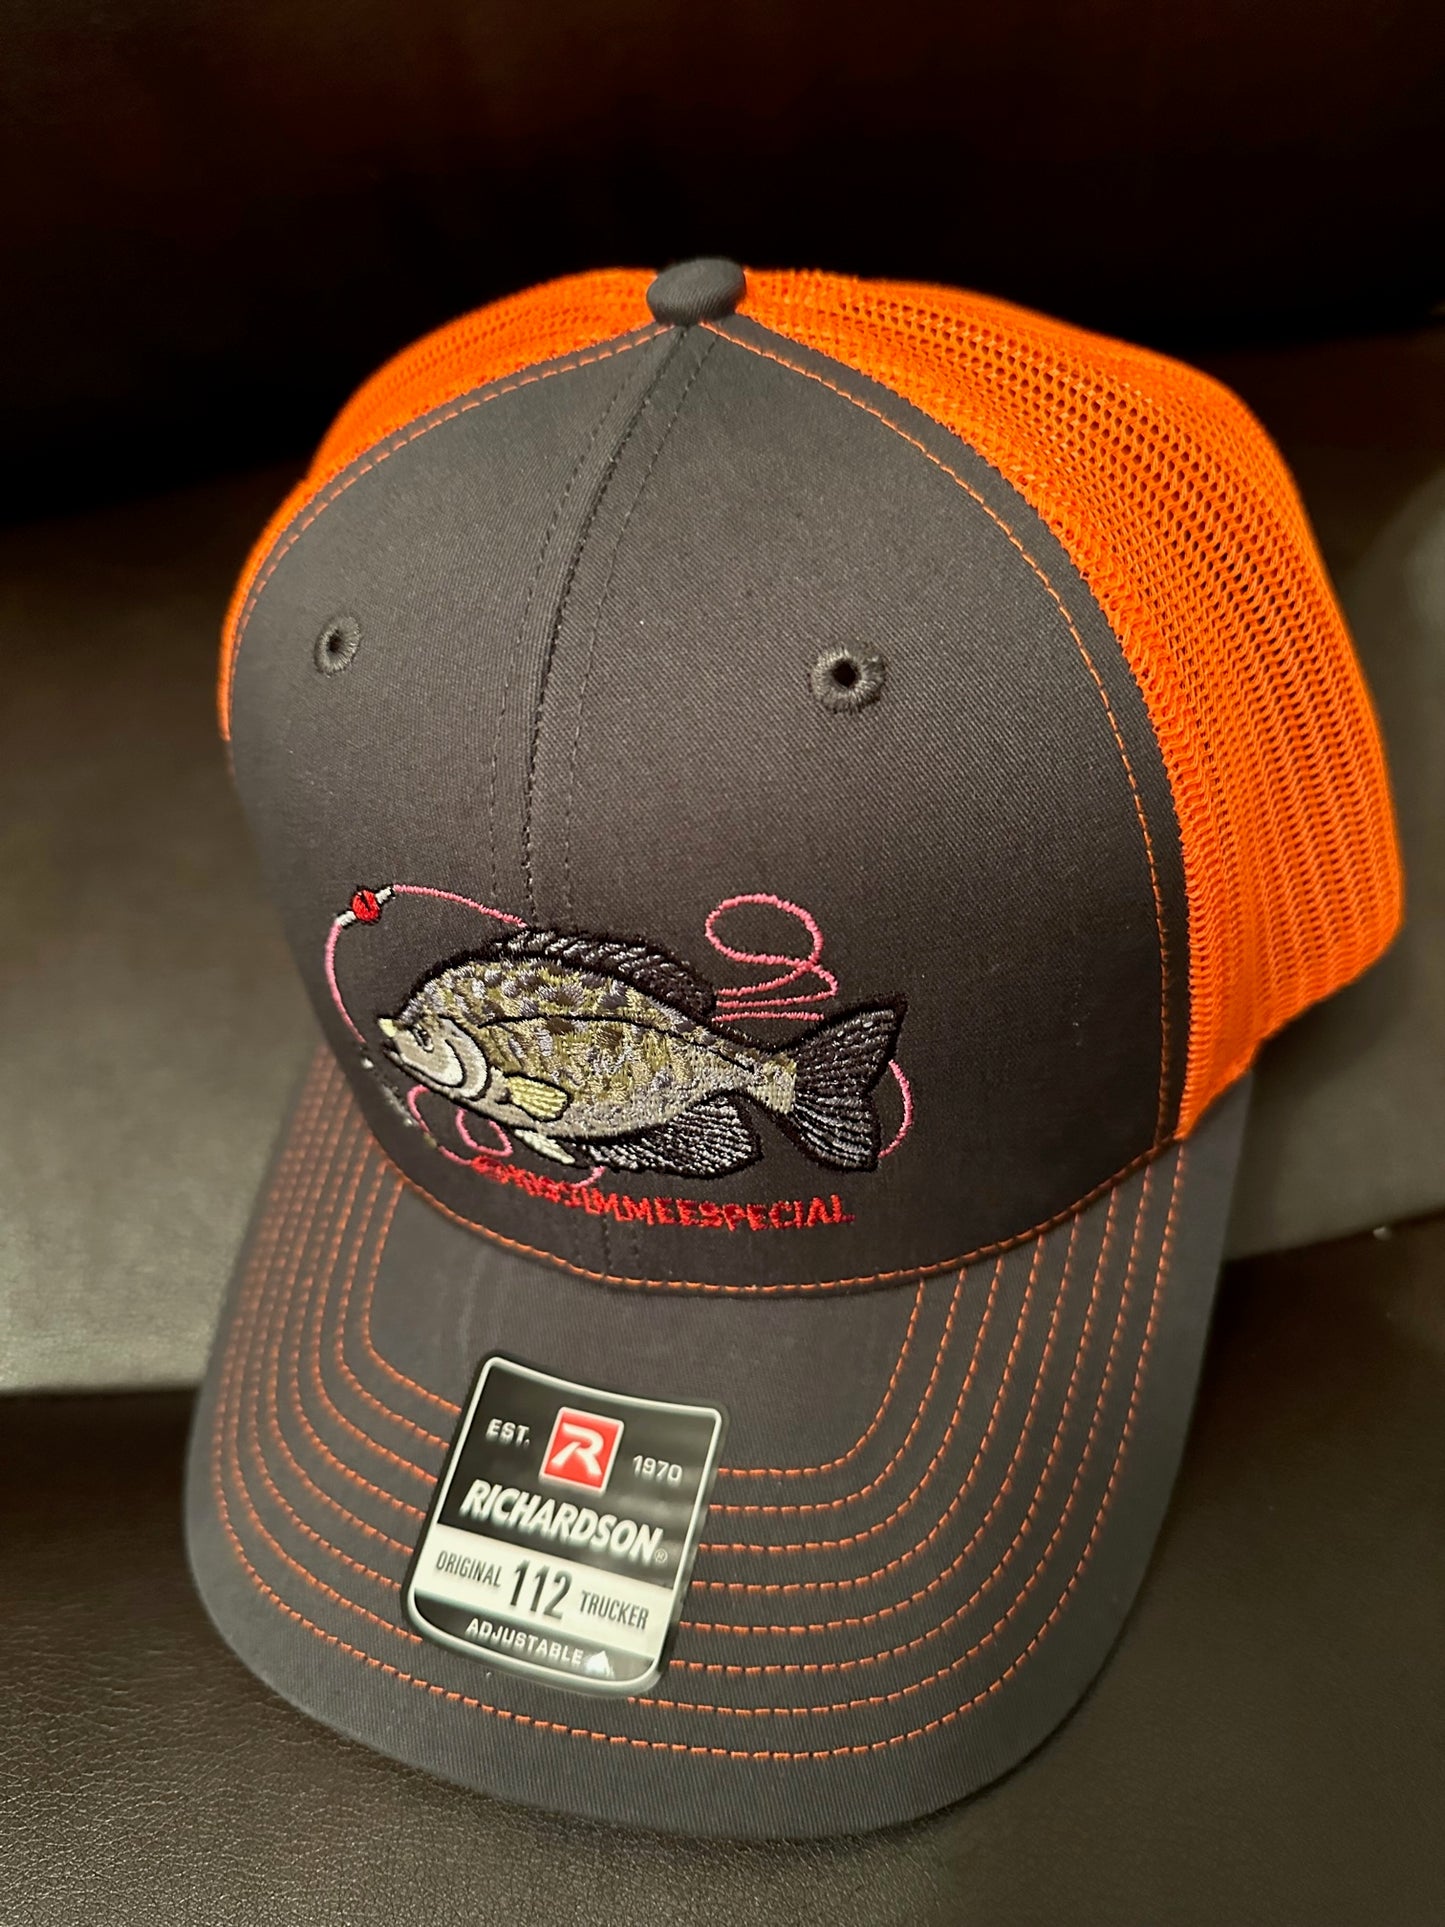 KISSIMMEESPECIAL CRAPPIE HAT